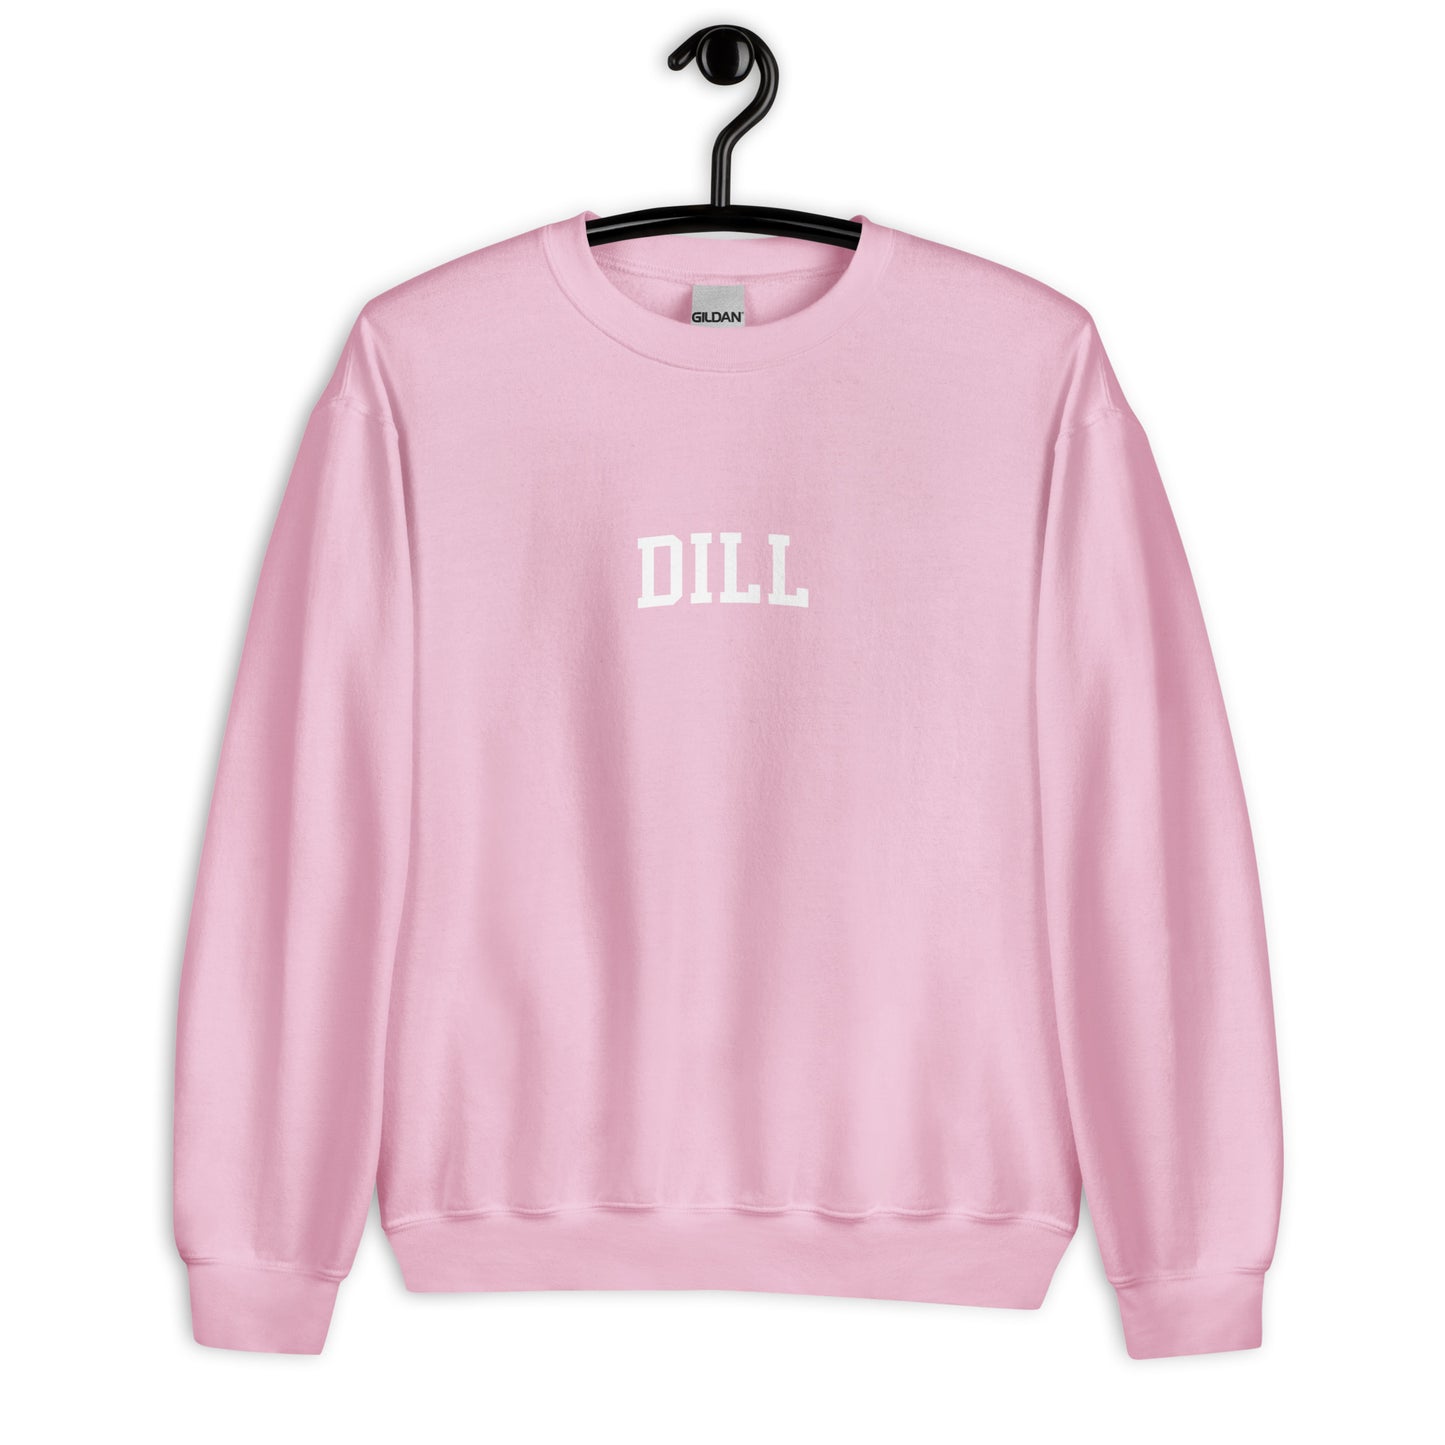 Dill Sweatshirt - Arched Font